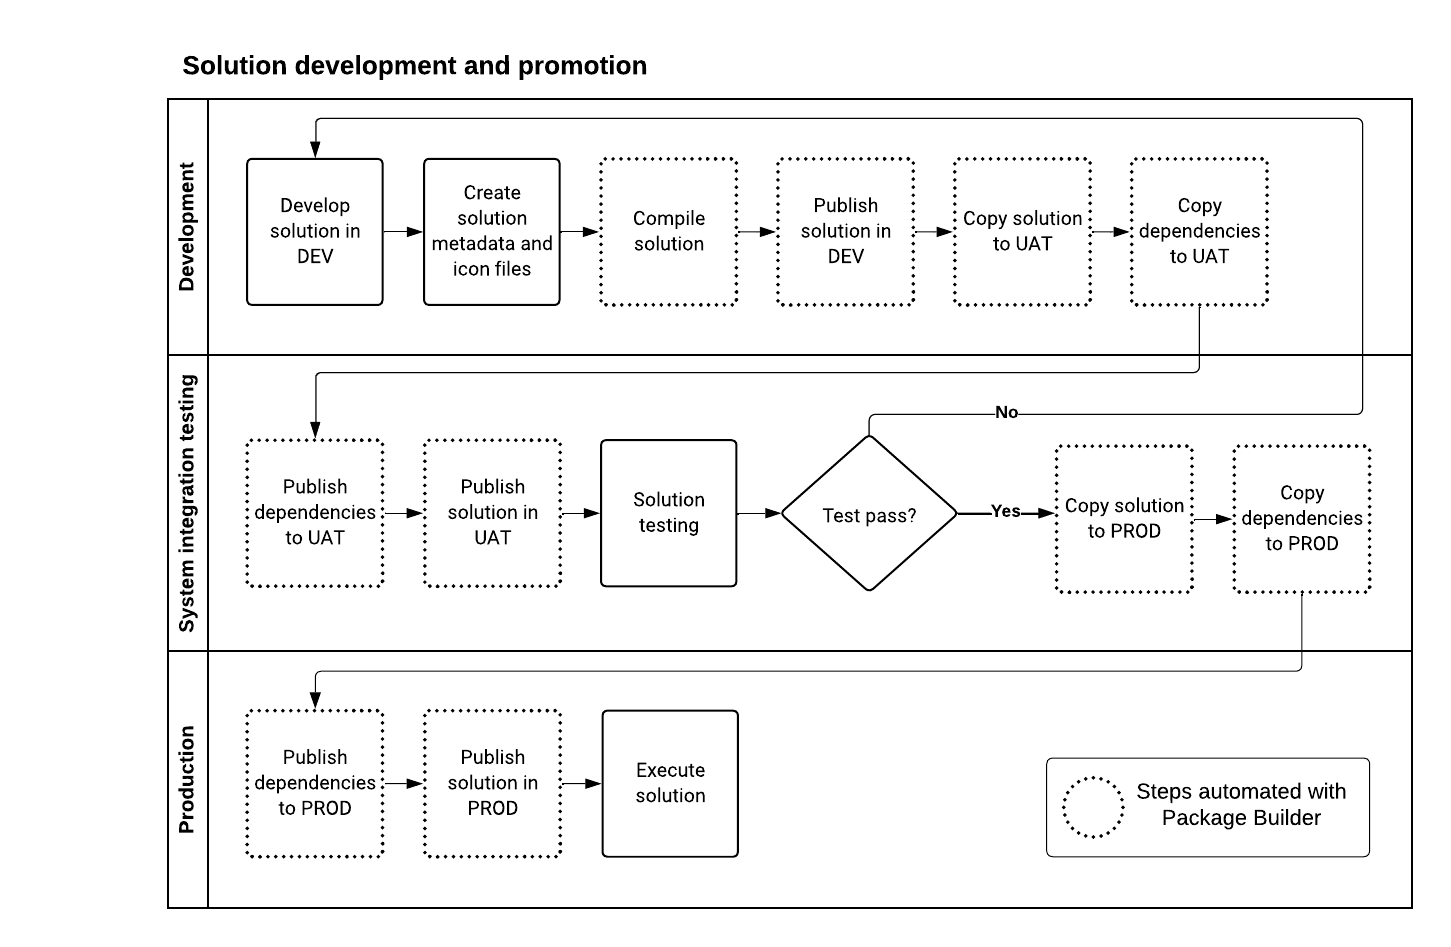 Flowchart depicting the solution promotion process, divided into development, system integration testing, and production. Steps automated with Package Builder are distinct from manual steps (development, testing, and execution).